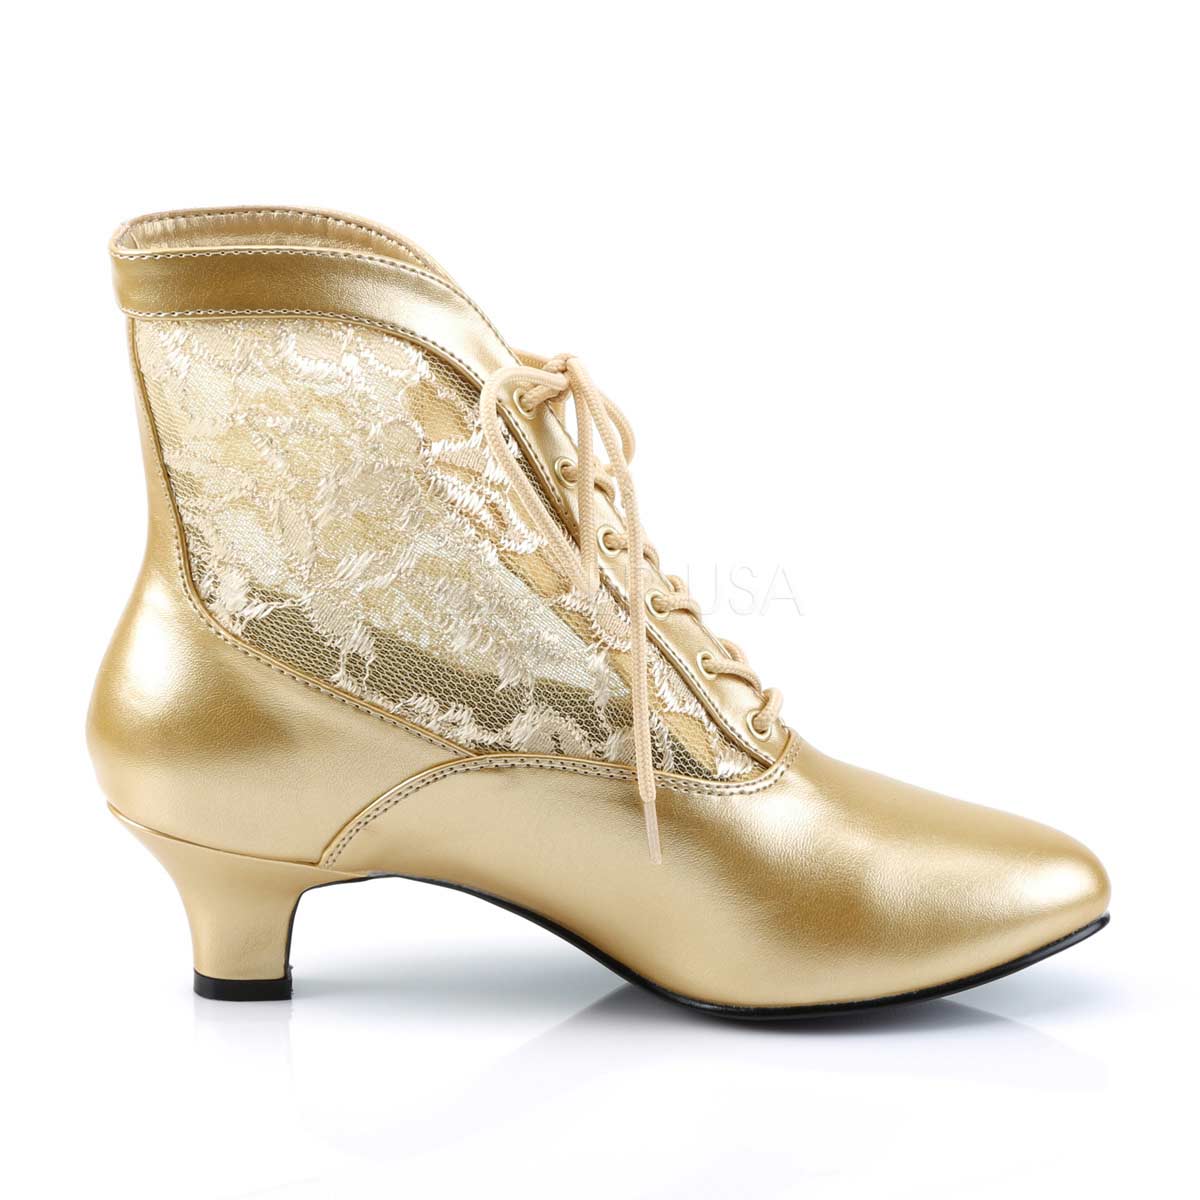 Pleaser Funtasma Dame-05 - Gold Pu-Lace in Sexy Boots - $51.91